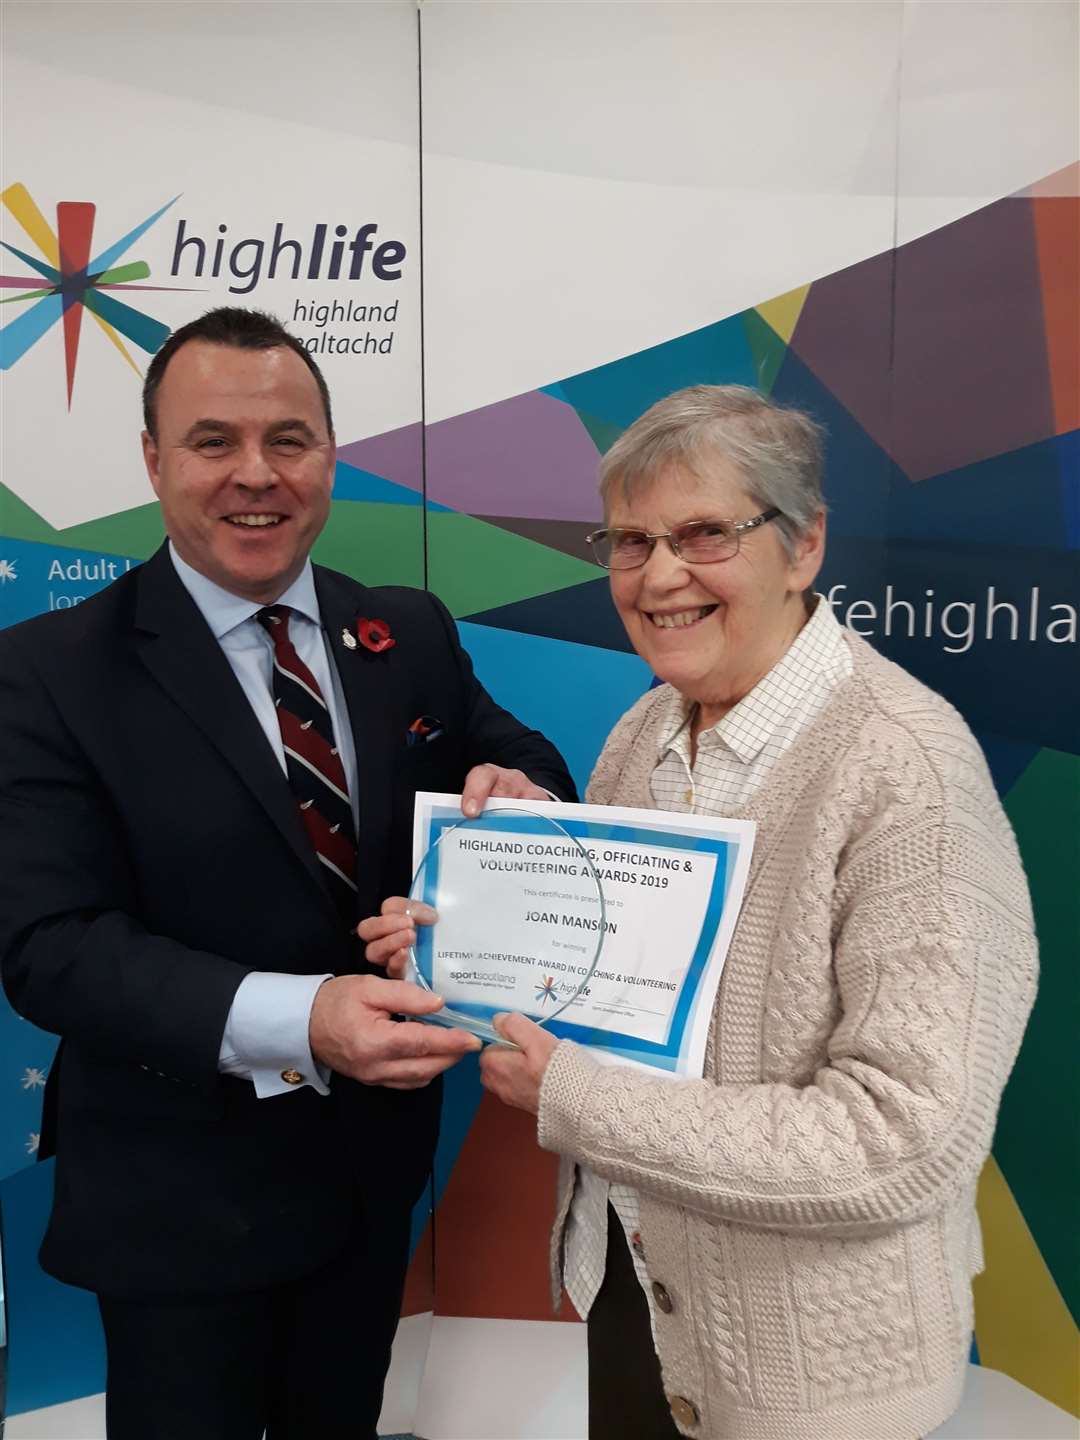 Steve Walsh, chief executive of High Life Highland, presents Joan Manson with her Lifetime Achievement in Coaching and Volunteering award.